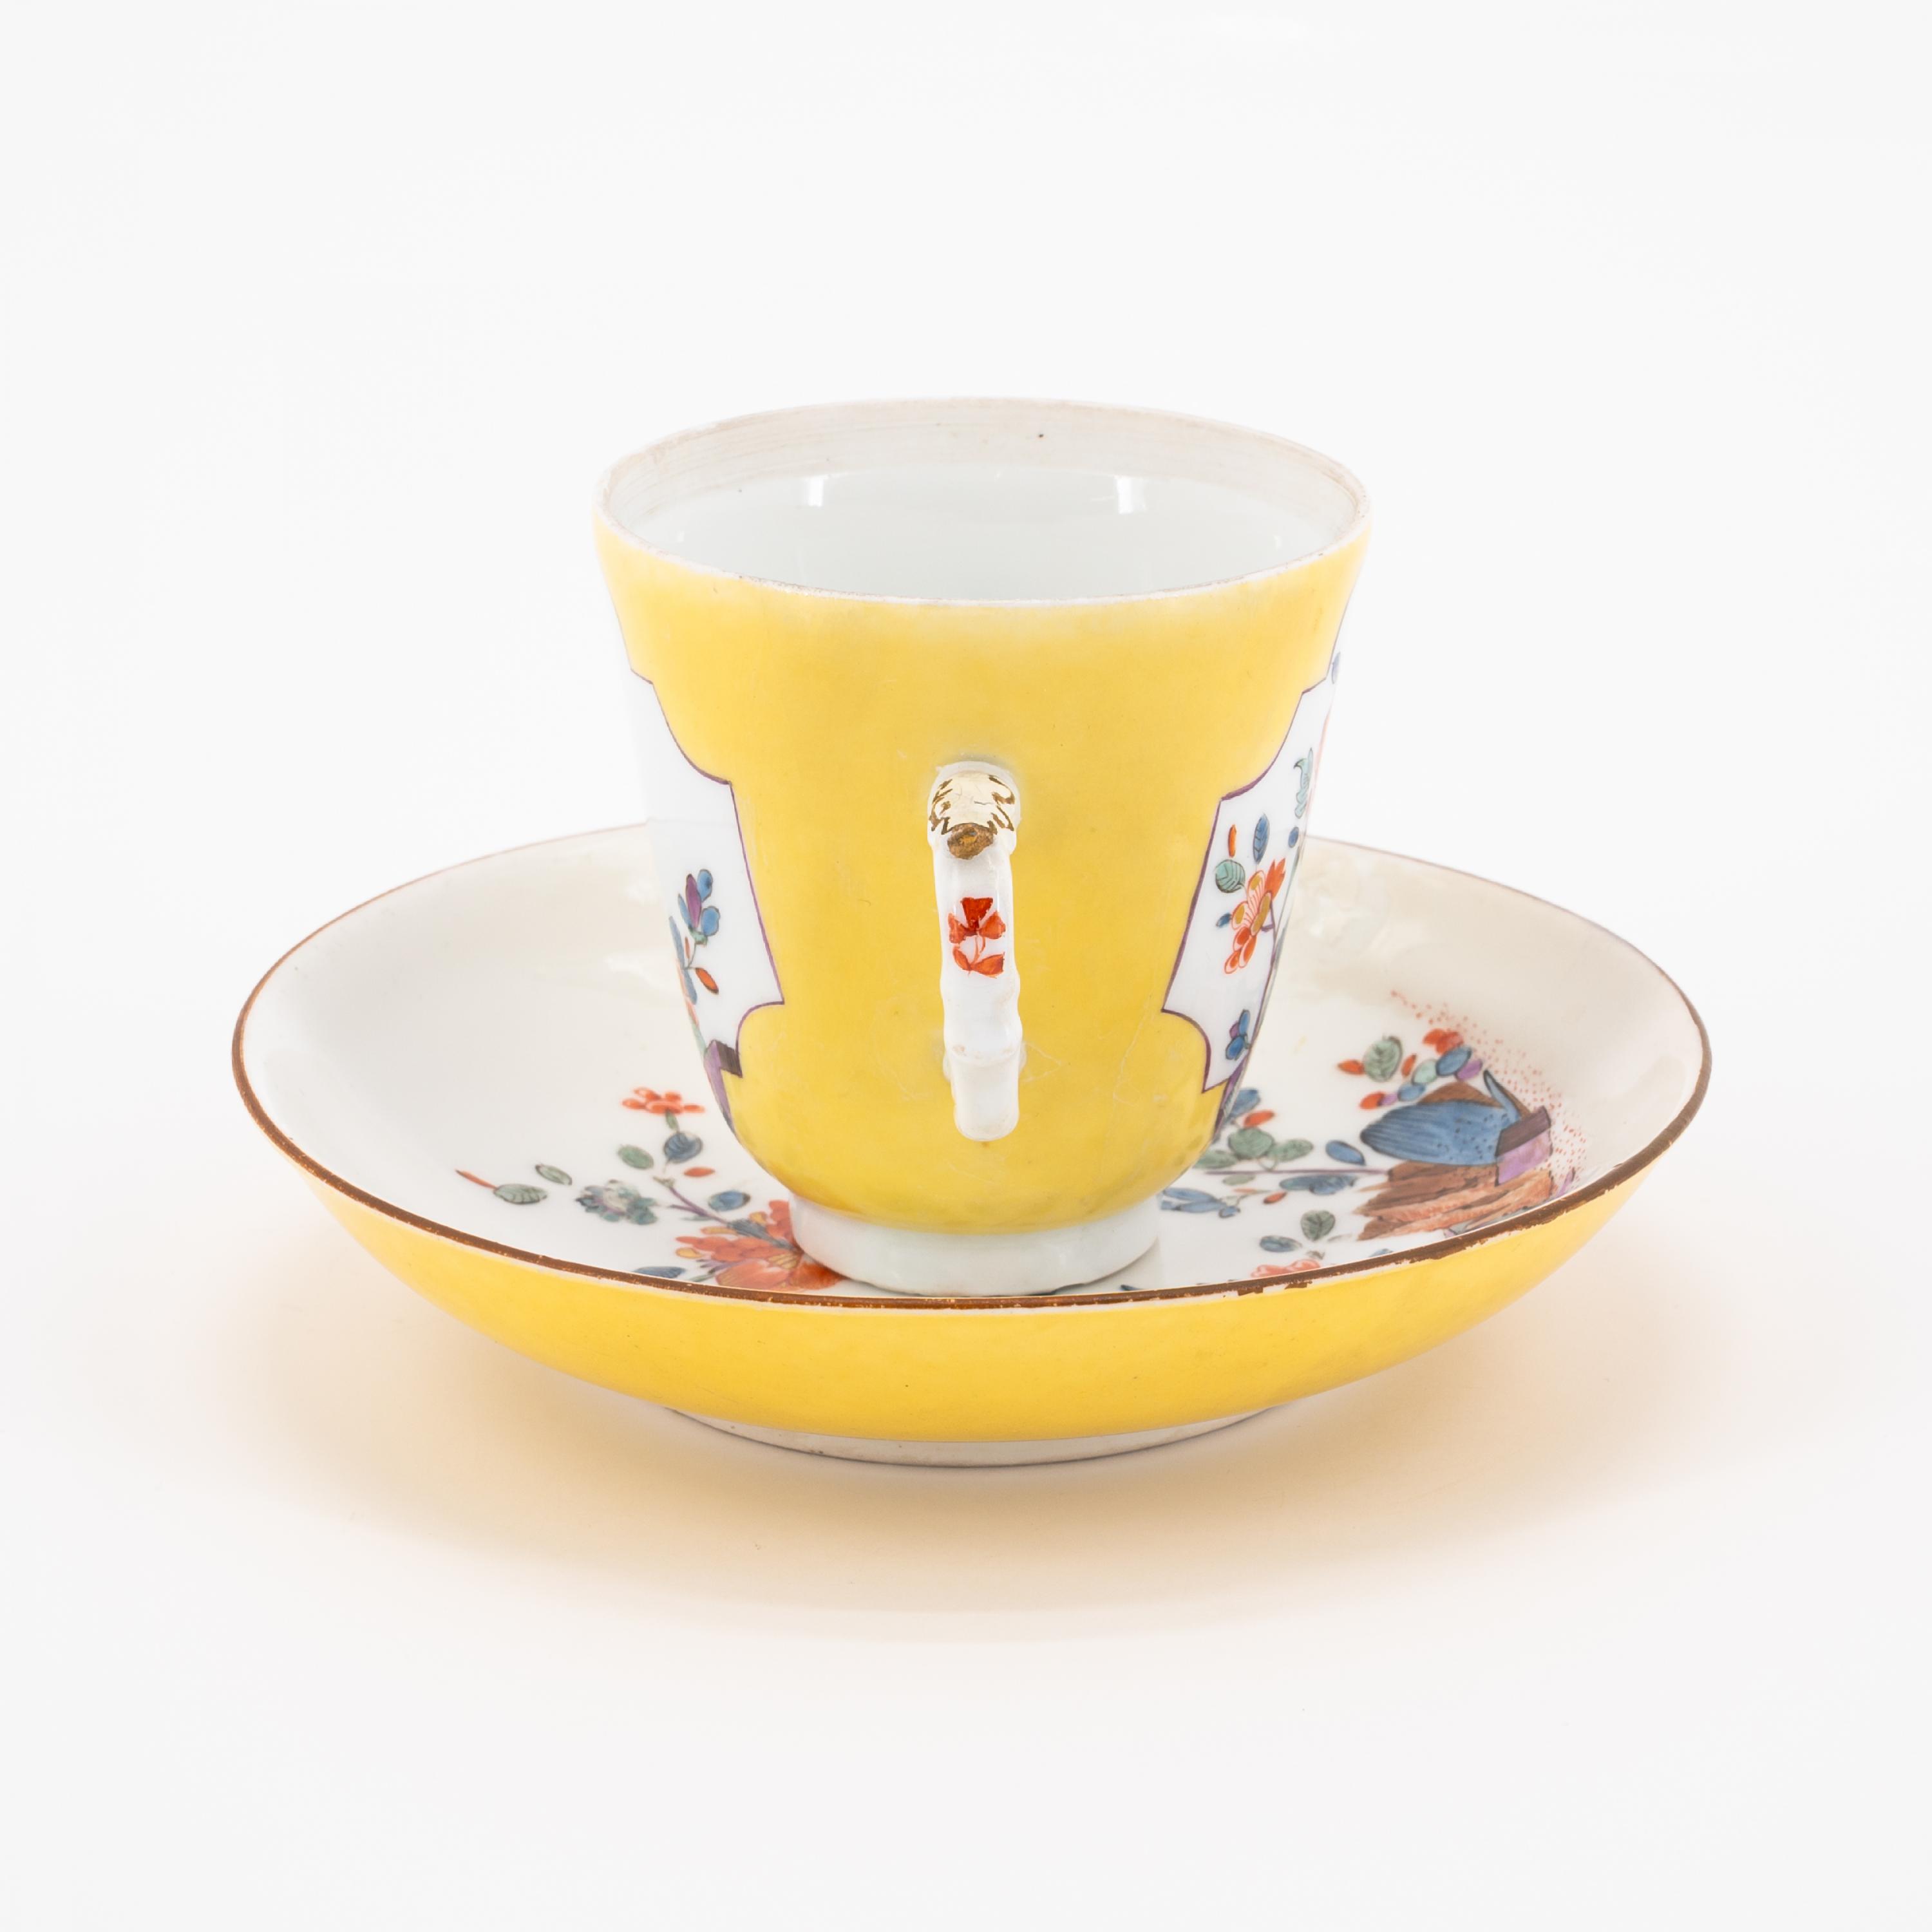 TWO PORCELAIN CUP WITH DOUBLE HANDLES & SAUCERS WITH KAKIEMON DECOR AND YELLOW GROUND - Image 9 of 11